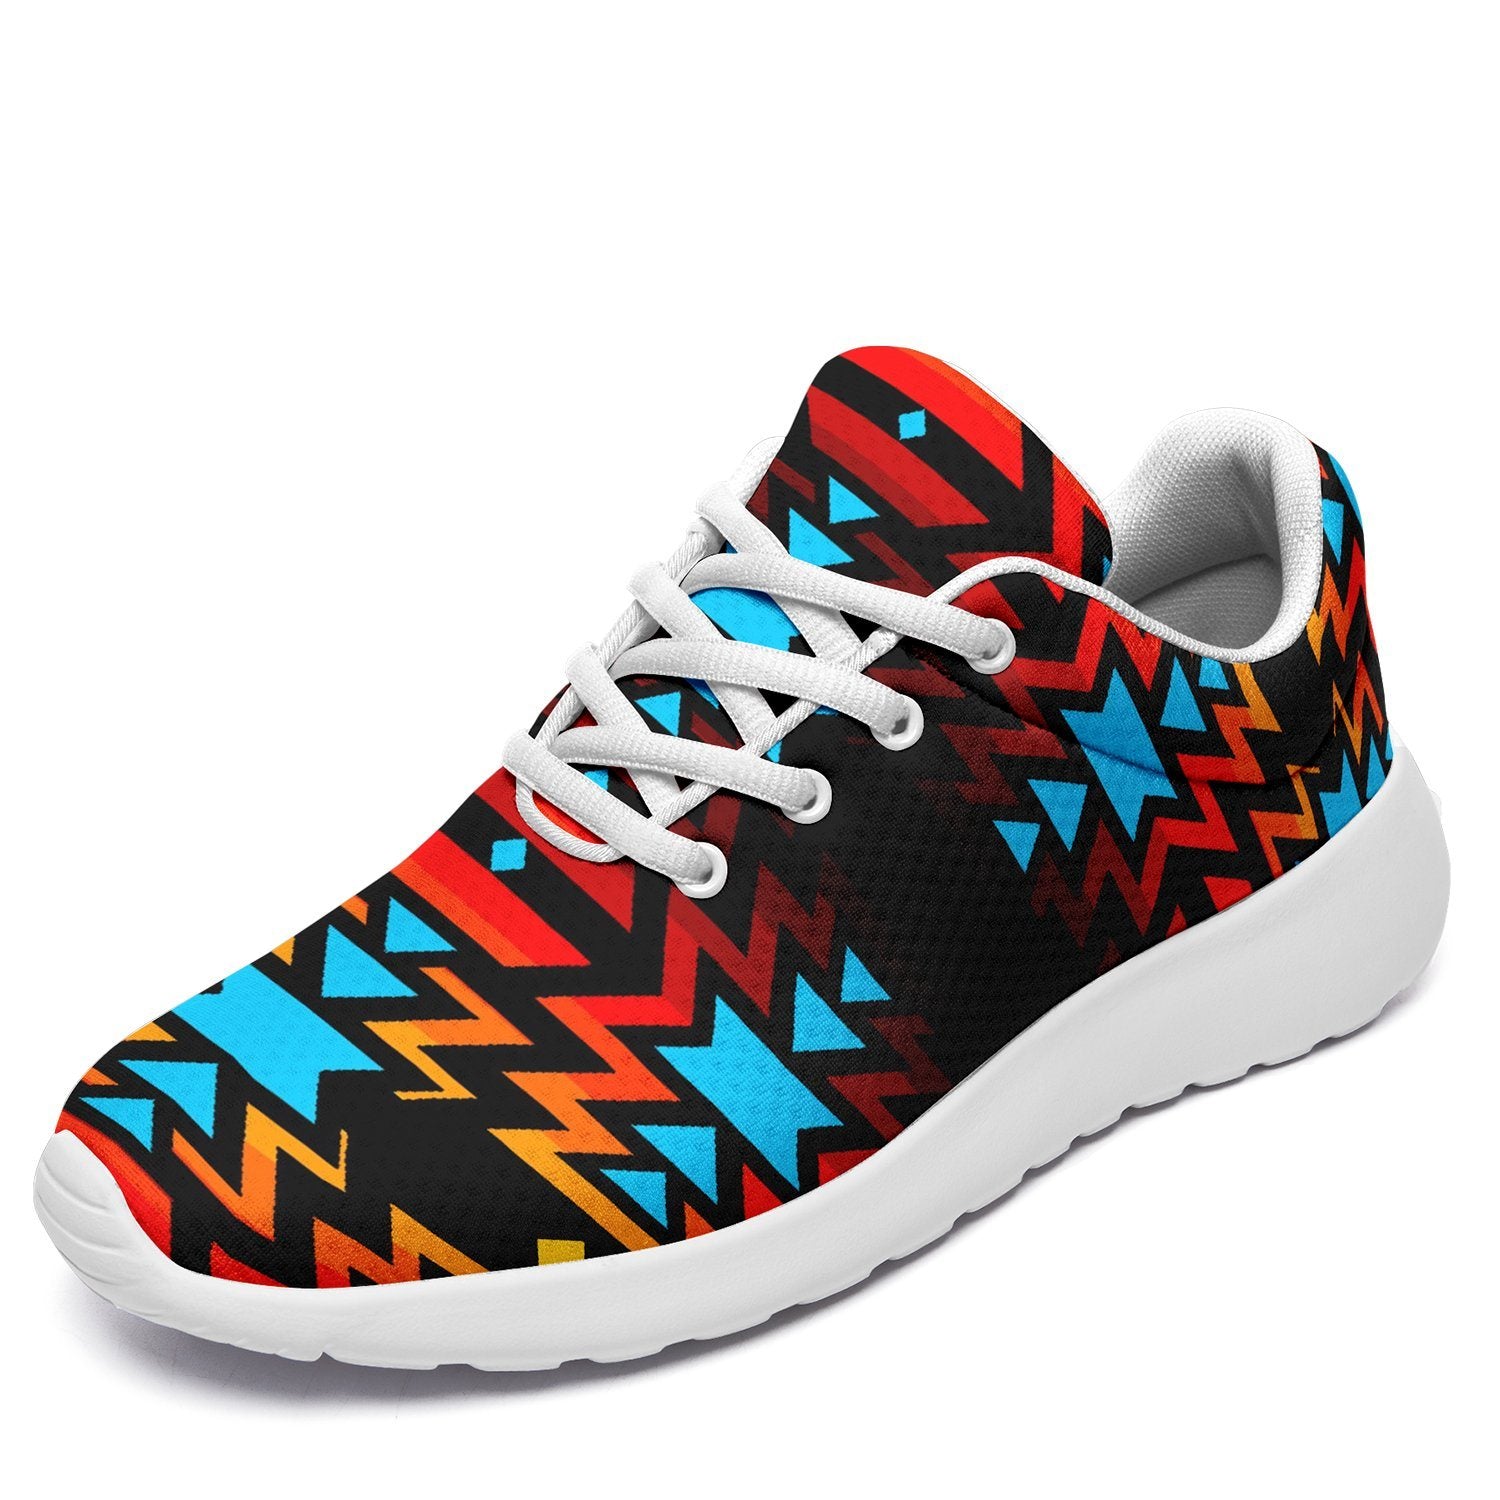 Black Fire and Turquoise Ikkaayi Sport Sneakers 49 Dzine US Women 4.5 / US Youth 3.5 / EUR 35 White Sole 